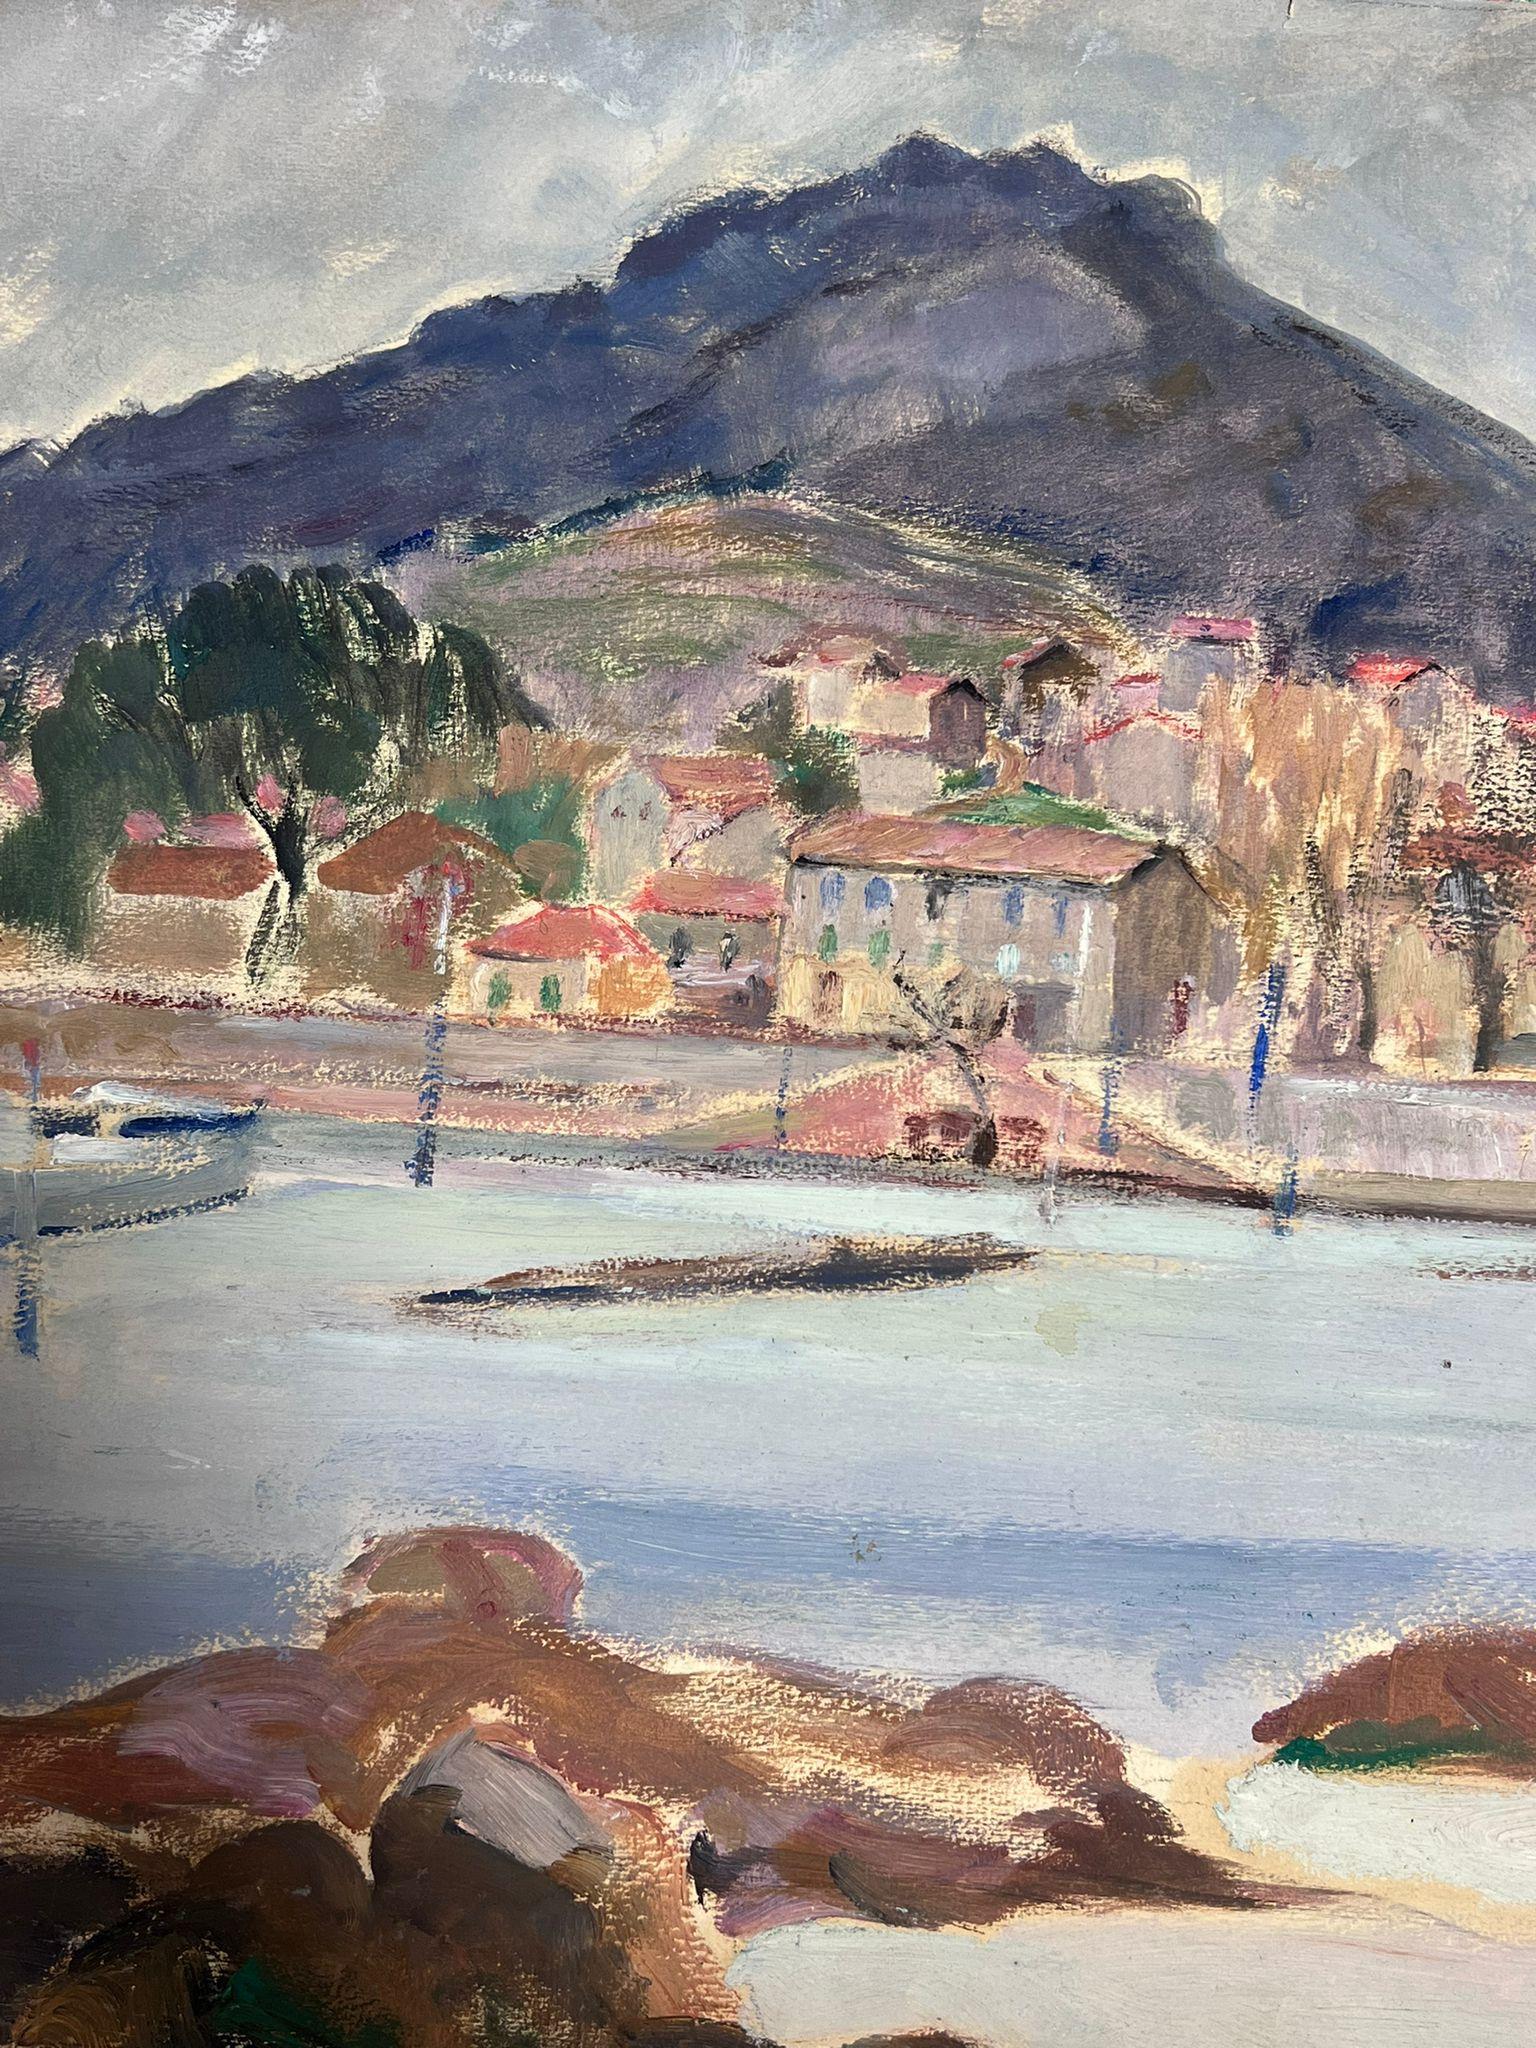 French Town Harbour
by Louise Alix, French 1950's Impressionist 
gouache on artist paper, unframed
painting: 13.5 x 16.5 inches
provenance: from a large private collection of this artists work in Northern France
condition: original, good and sound